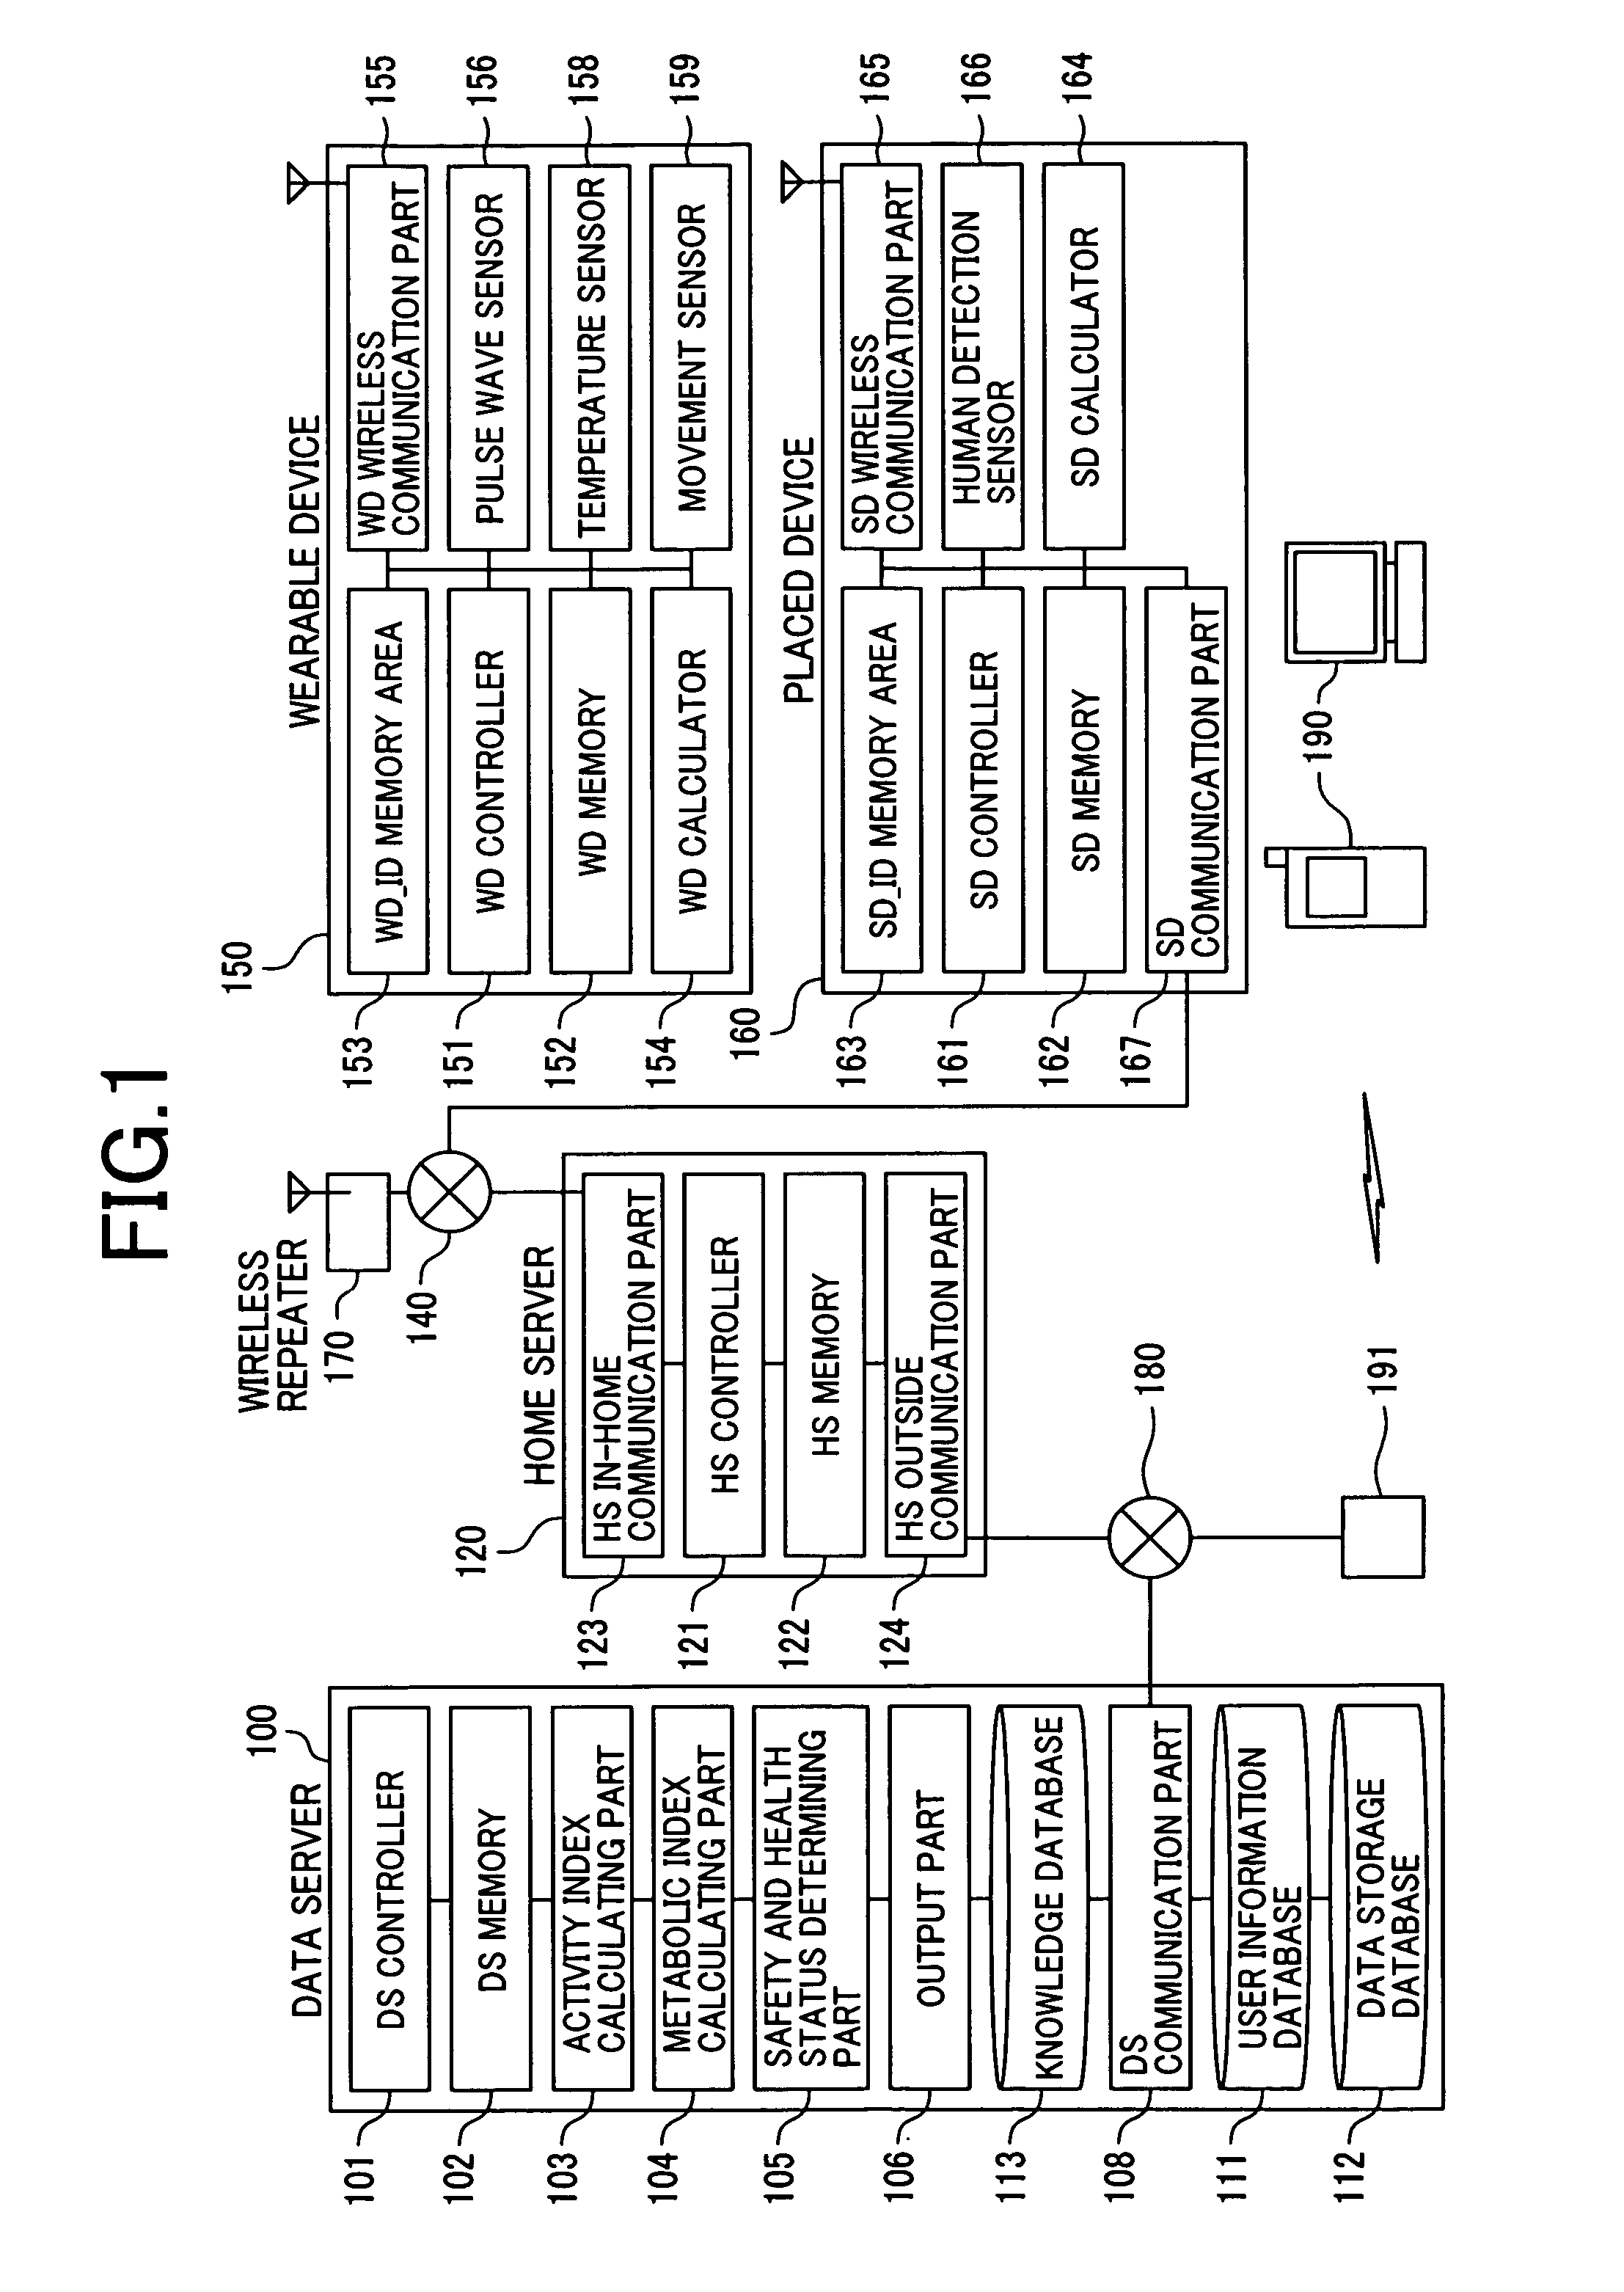 Safety and health information reporting system